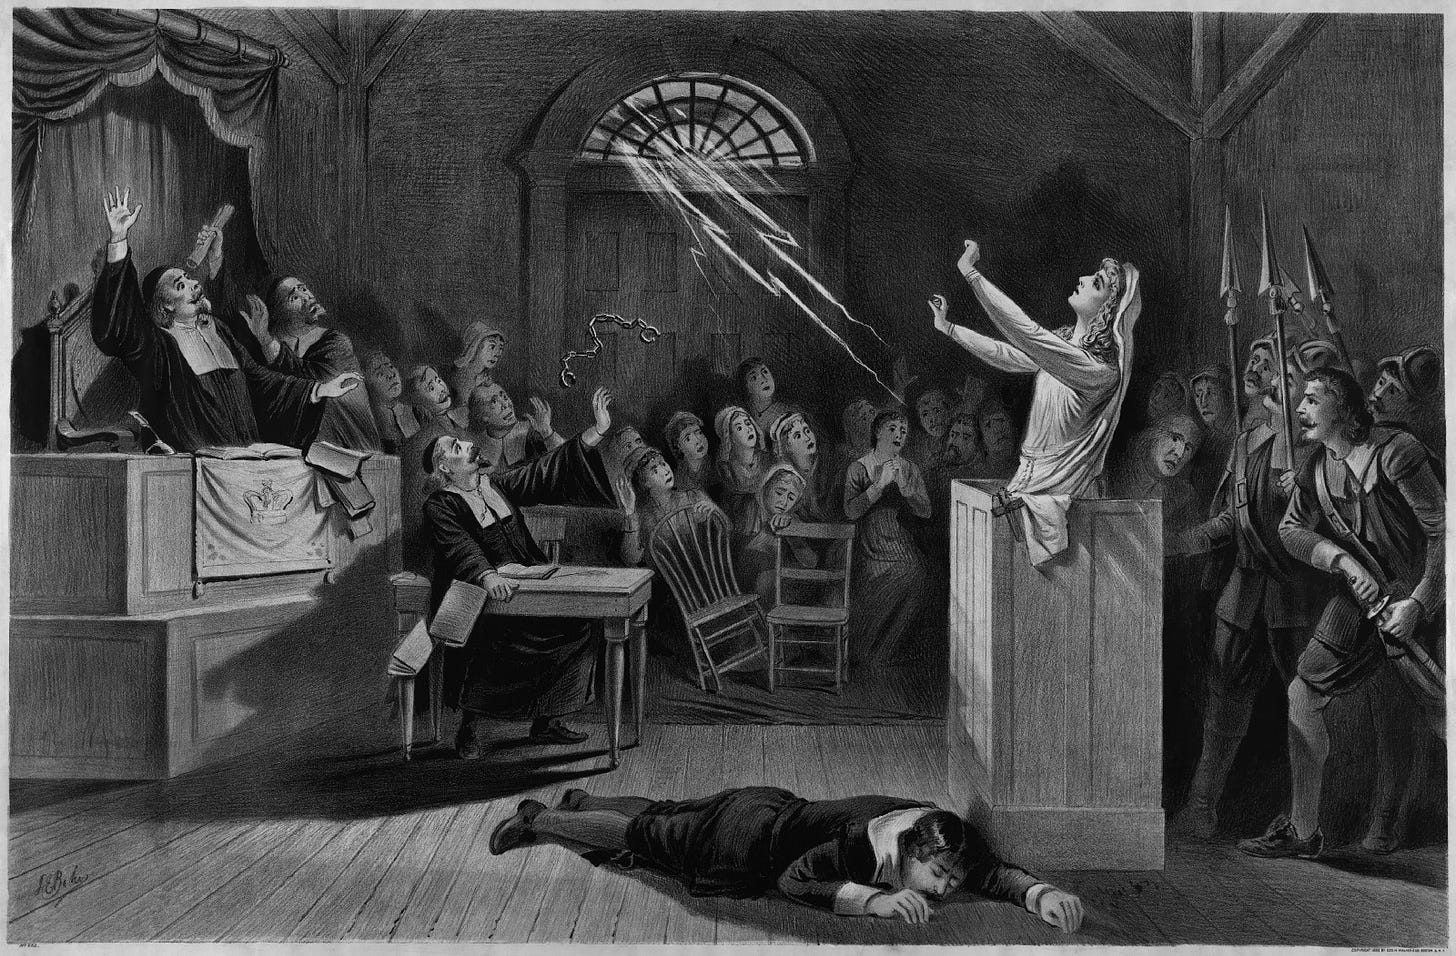 Salem witch trials: an accused witch channels powers from the sky as court members look on in fear